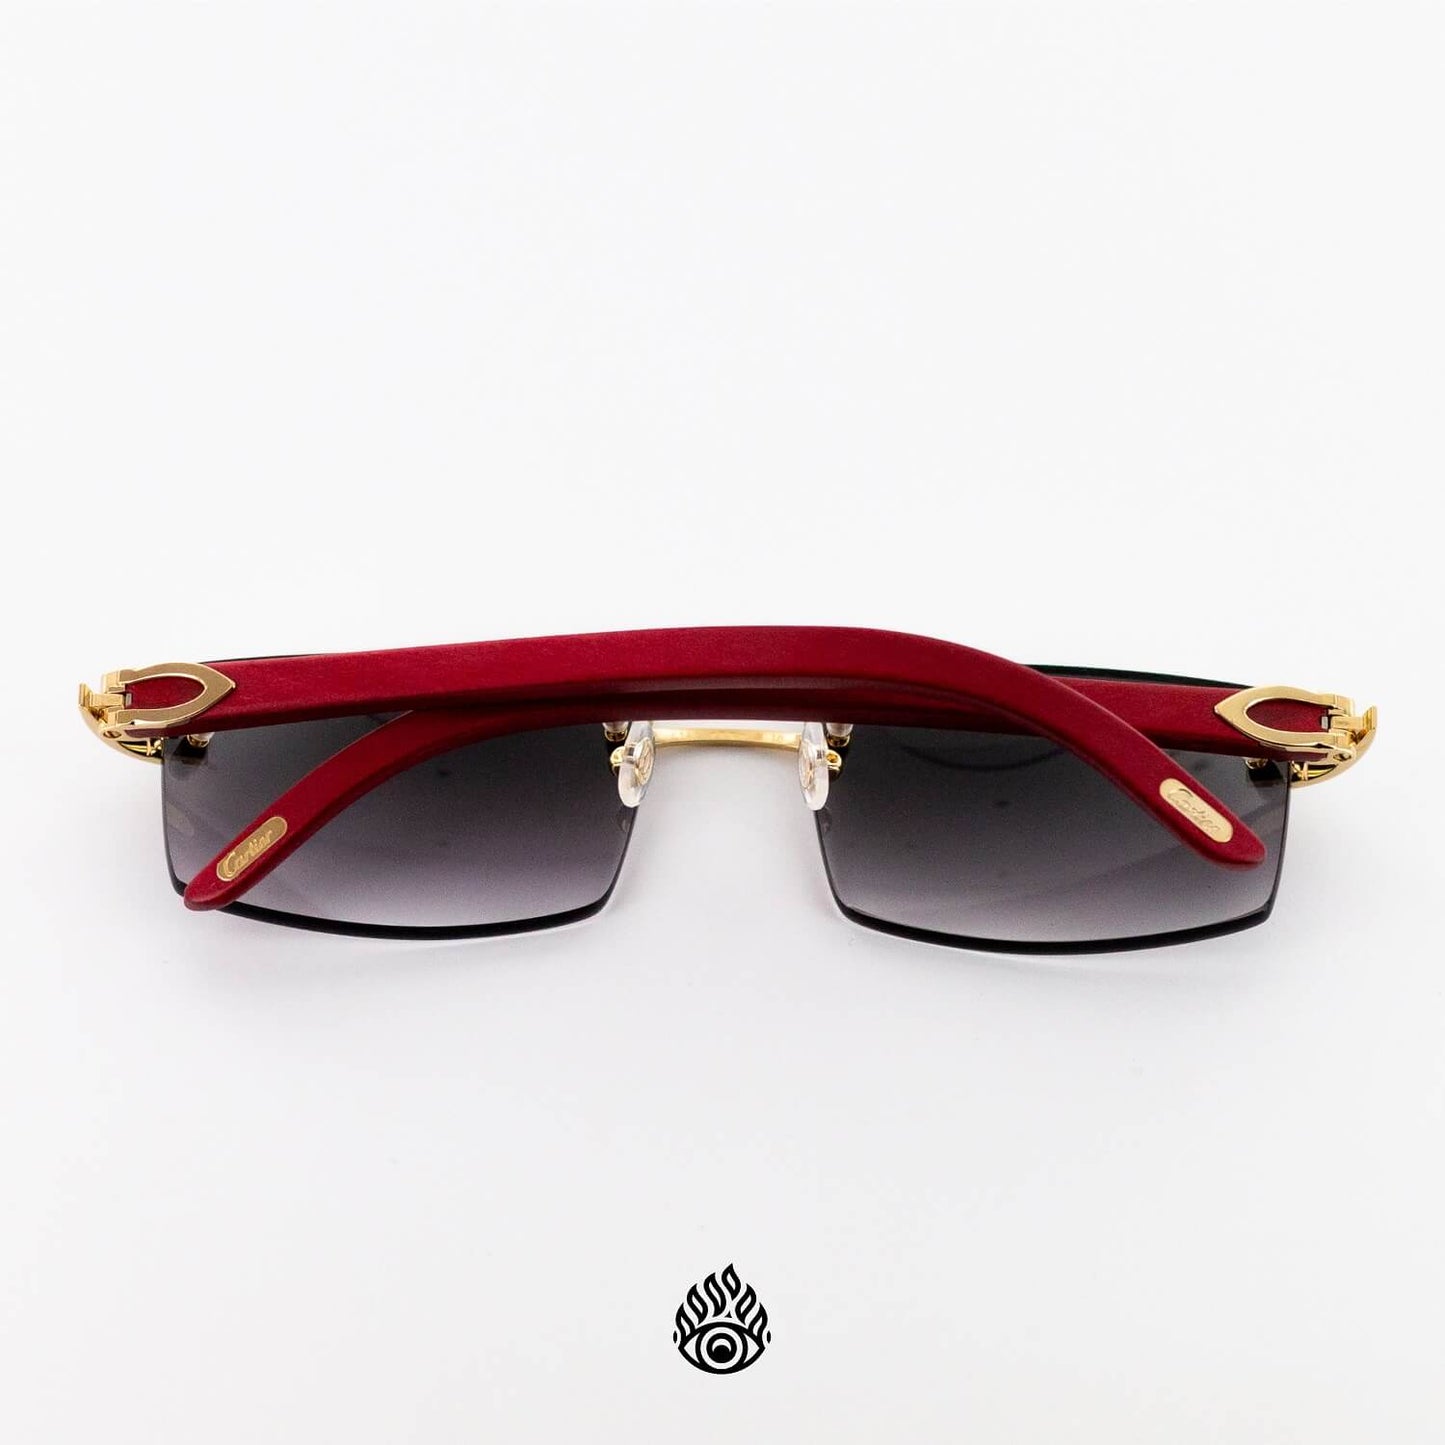 Cartier Red Wood Glasses with Gold C Decor and Grey Lens